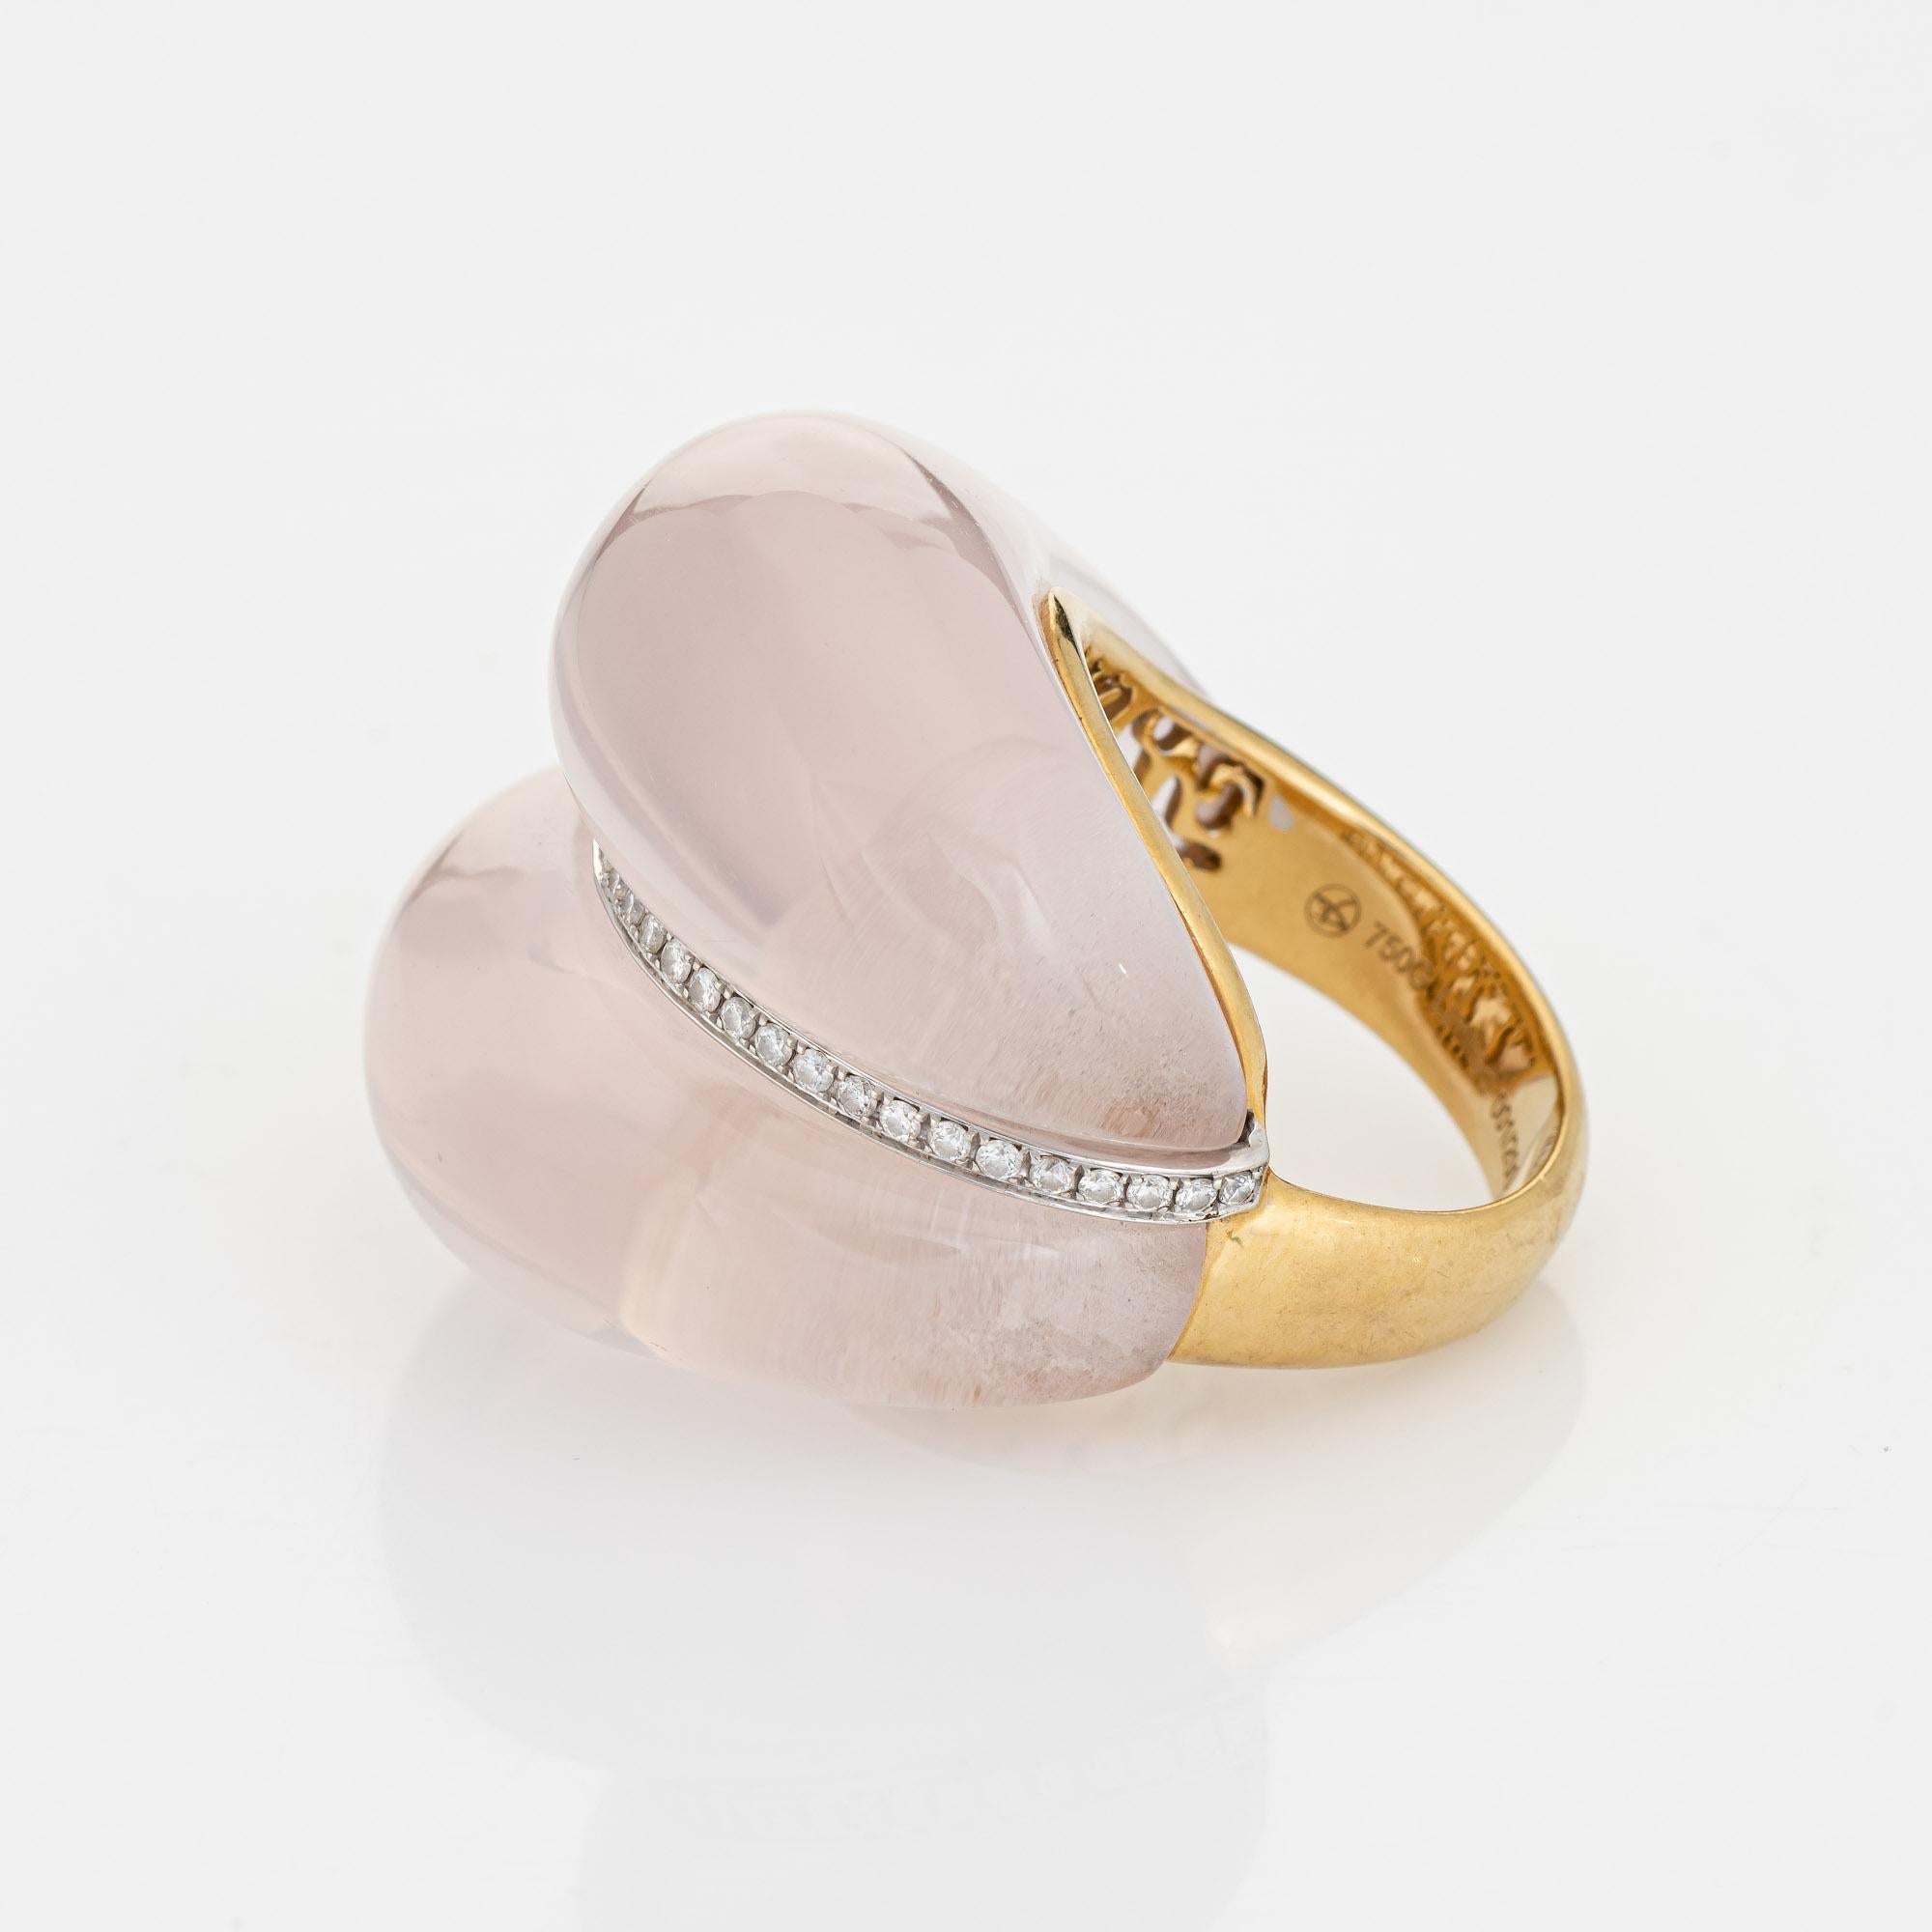 Contemporary Rose Quartz Diamond Ring Estate 18k Yellow Gold Limited Edition In Good Condition For Sale In Torrance, CA